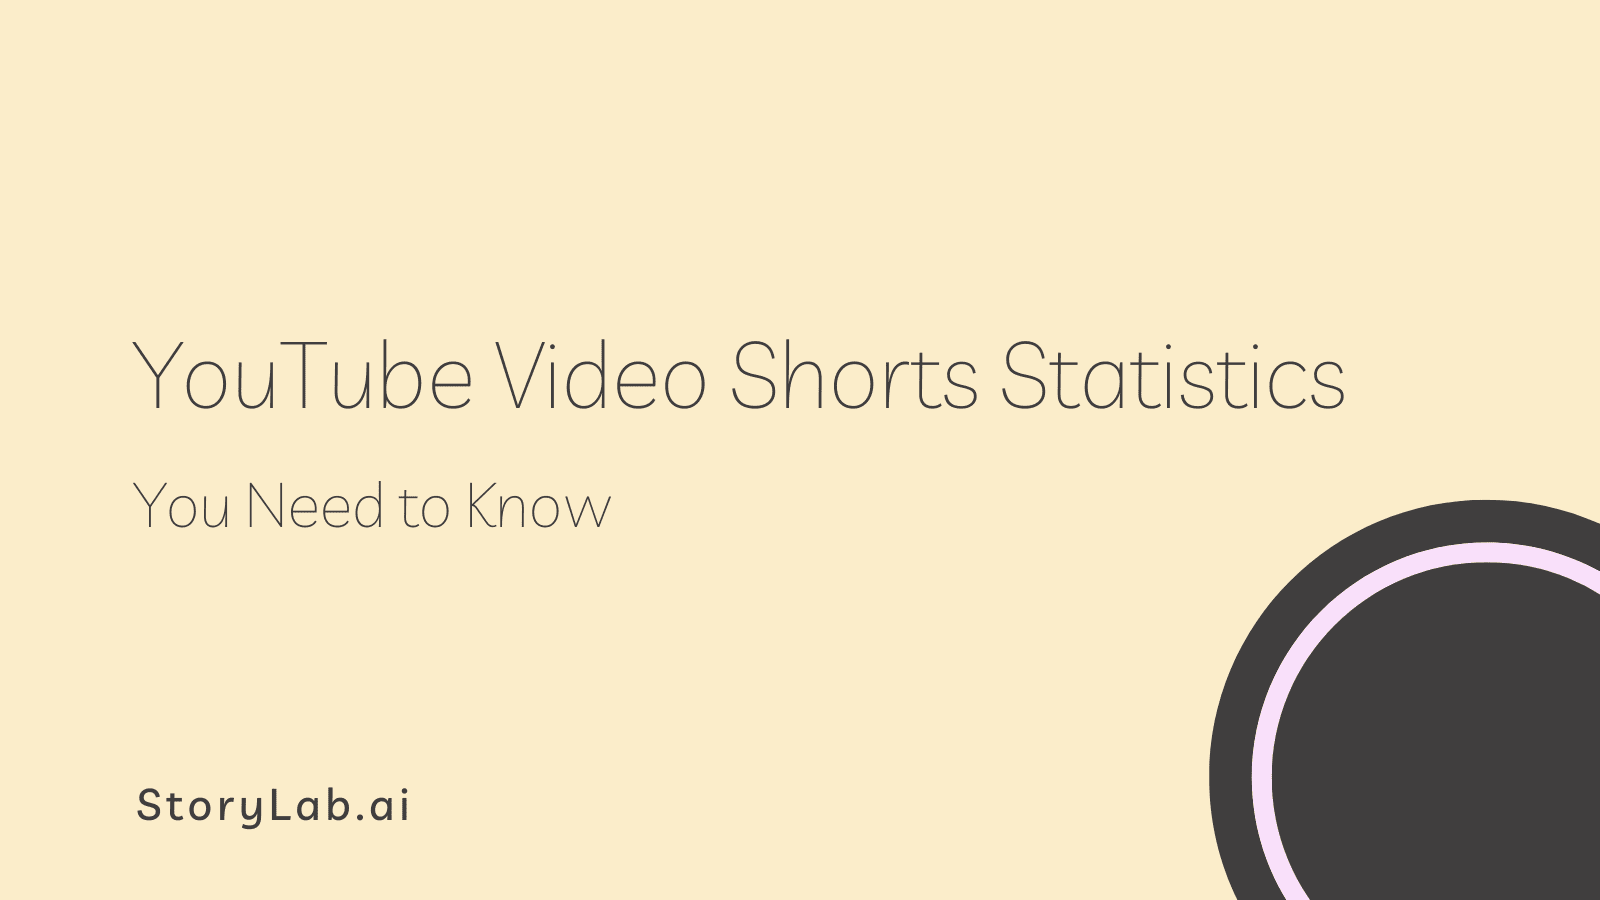 YouTube Video Shorts Statistics You Need to Know